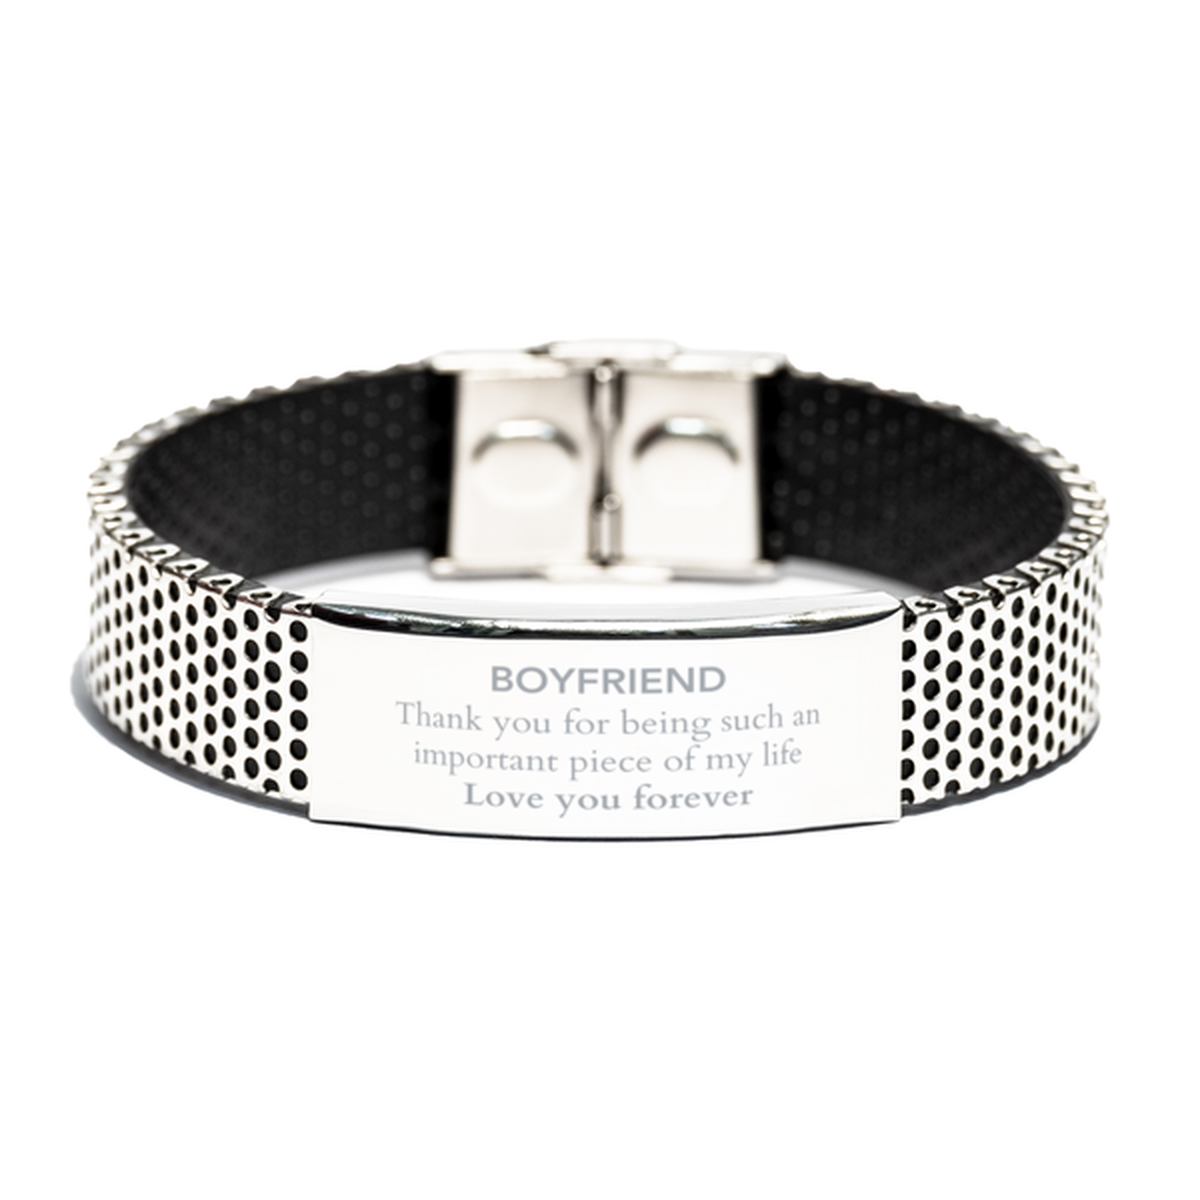 Appropriate Boyfriend Stainless Steel Bracelet Epic Birthday Gifts for Boyfriend Thank you for being such an important piece of my life Boyfriend Christmas Mothers Fathers Day